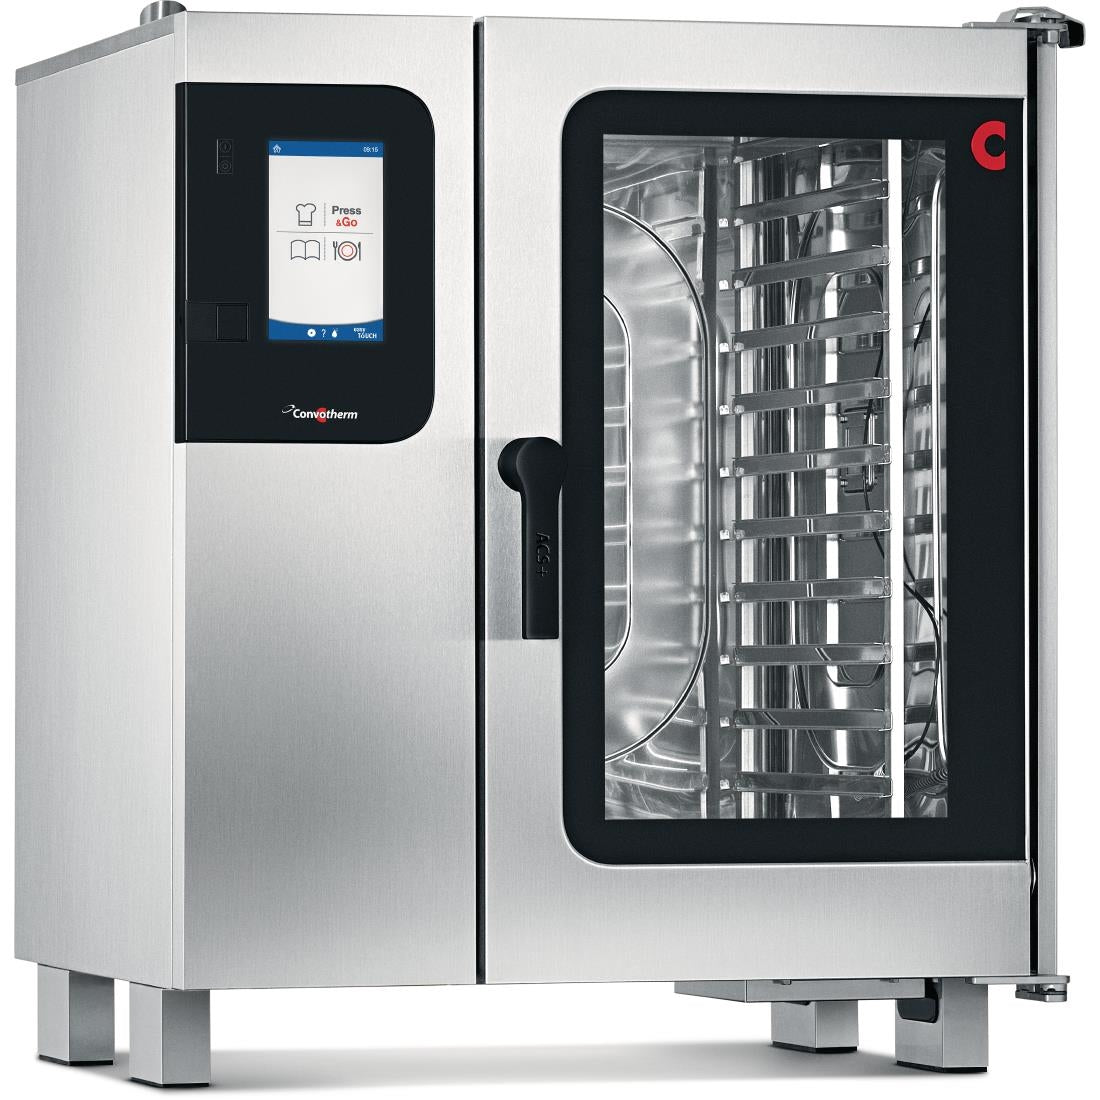 HC257-MO Convotherm 4 easyTouch Combi Oven 10 x 1 x1 GN Grid JD Catering Equipment Solutions Ltd